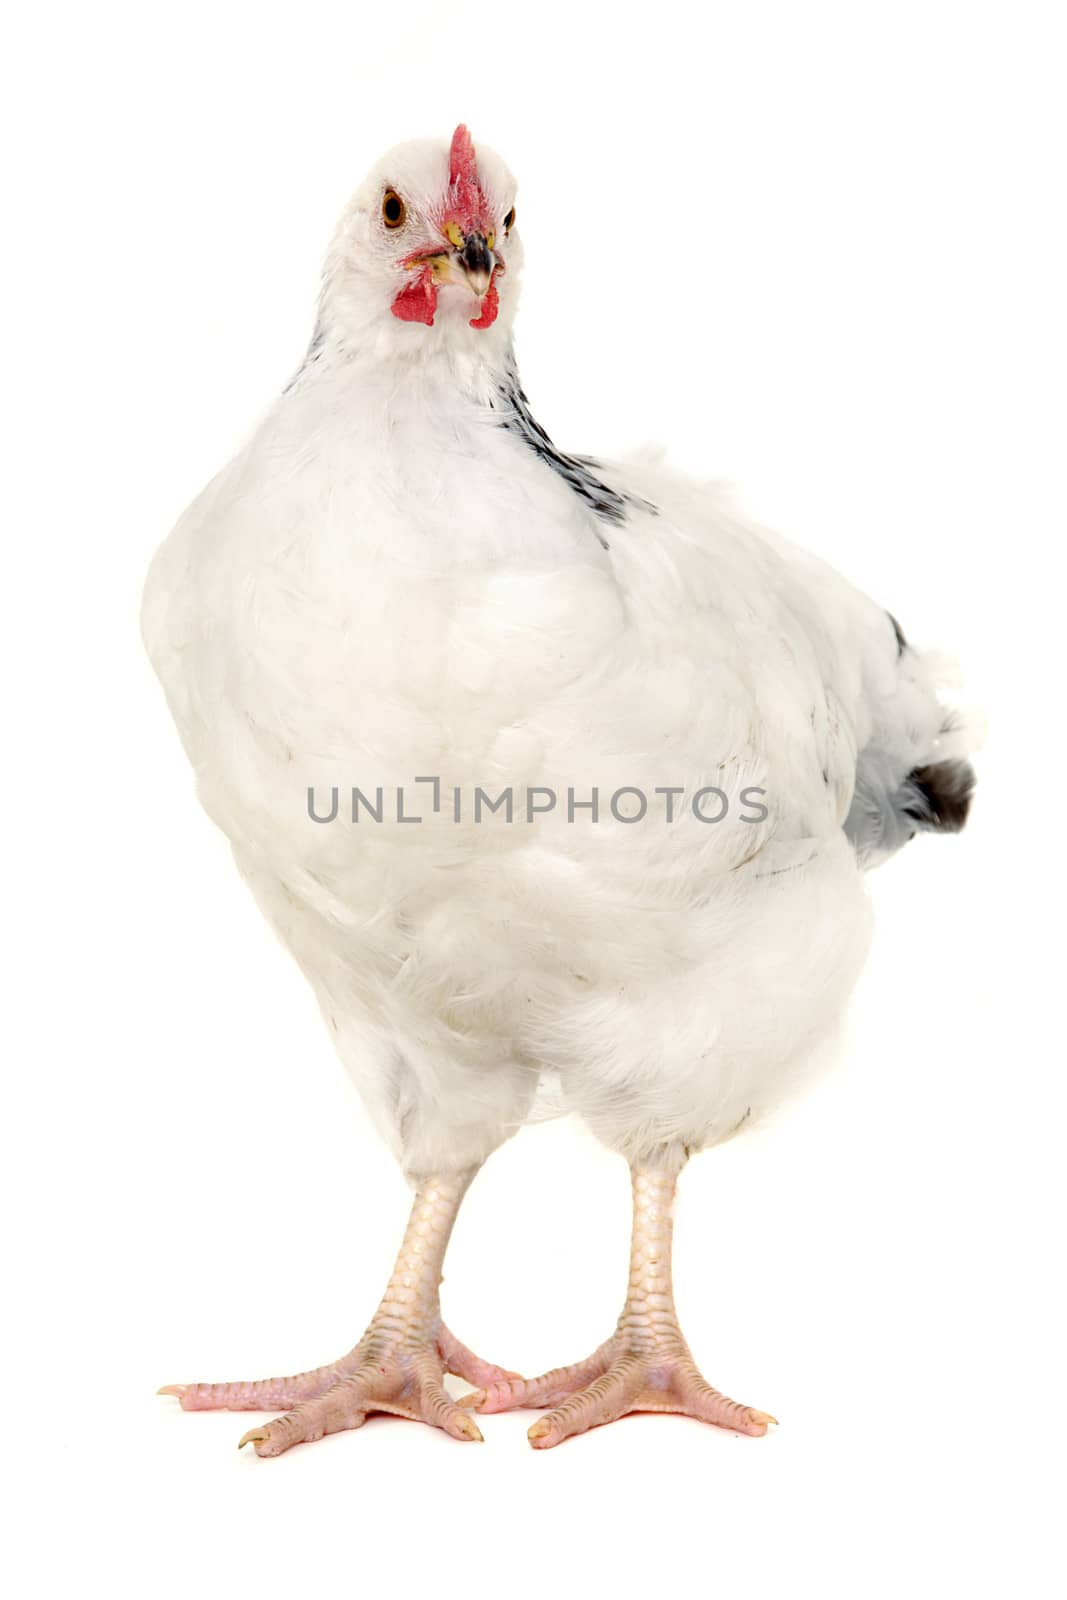 Hen is standing and looking on a white background.